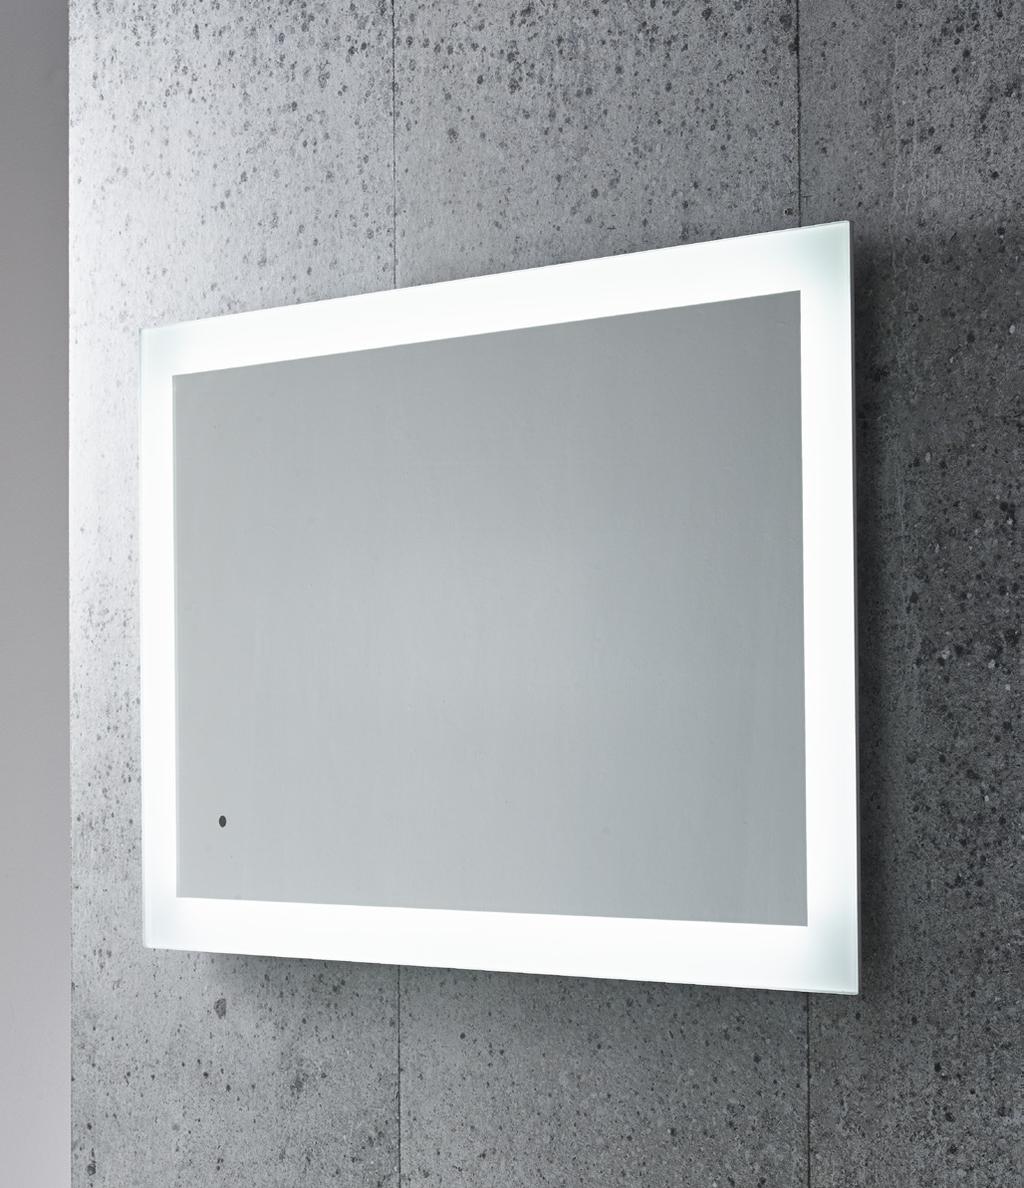 00 Appear LED Illuminated Mirror 900(w) x 600(h) x 30(d)mm Features: Energy efficient LED lighting, Heated